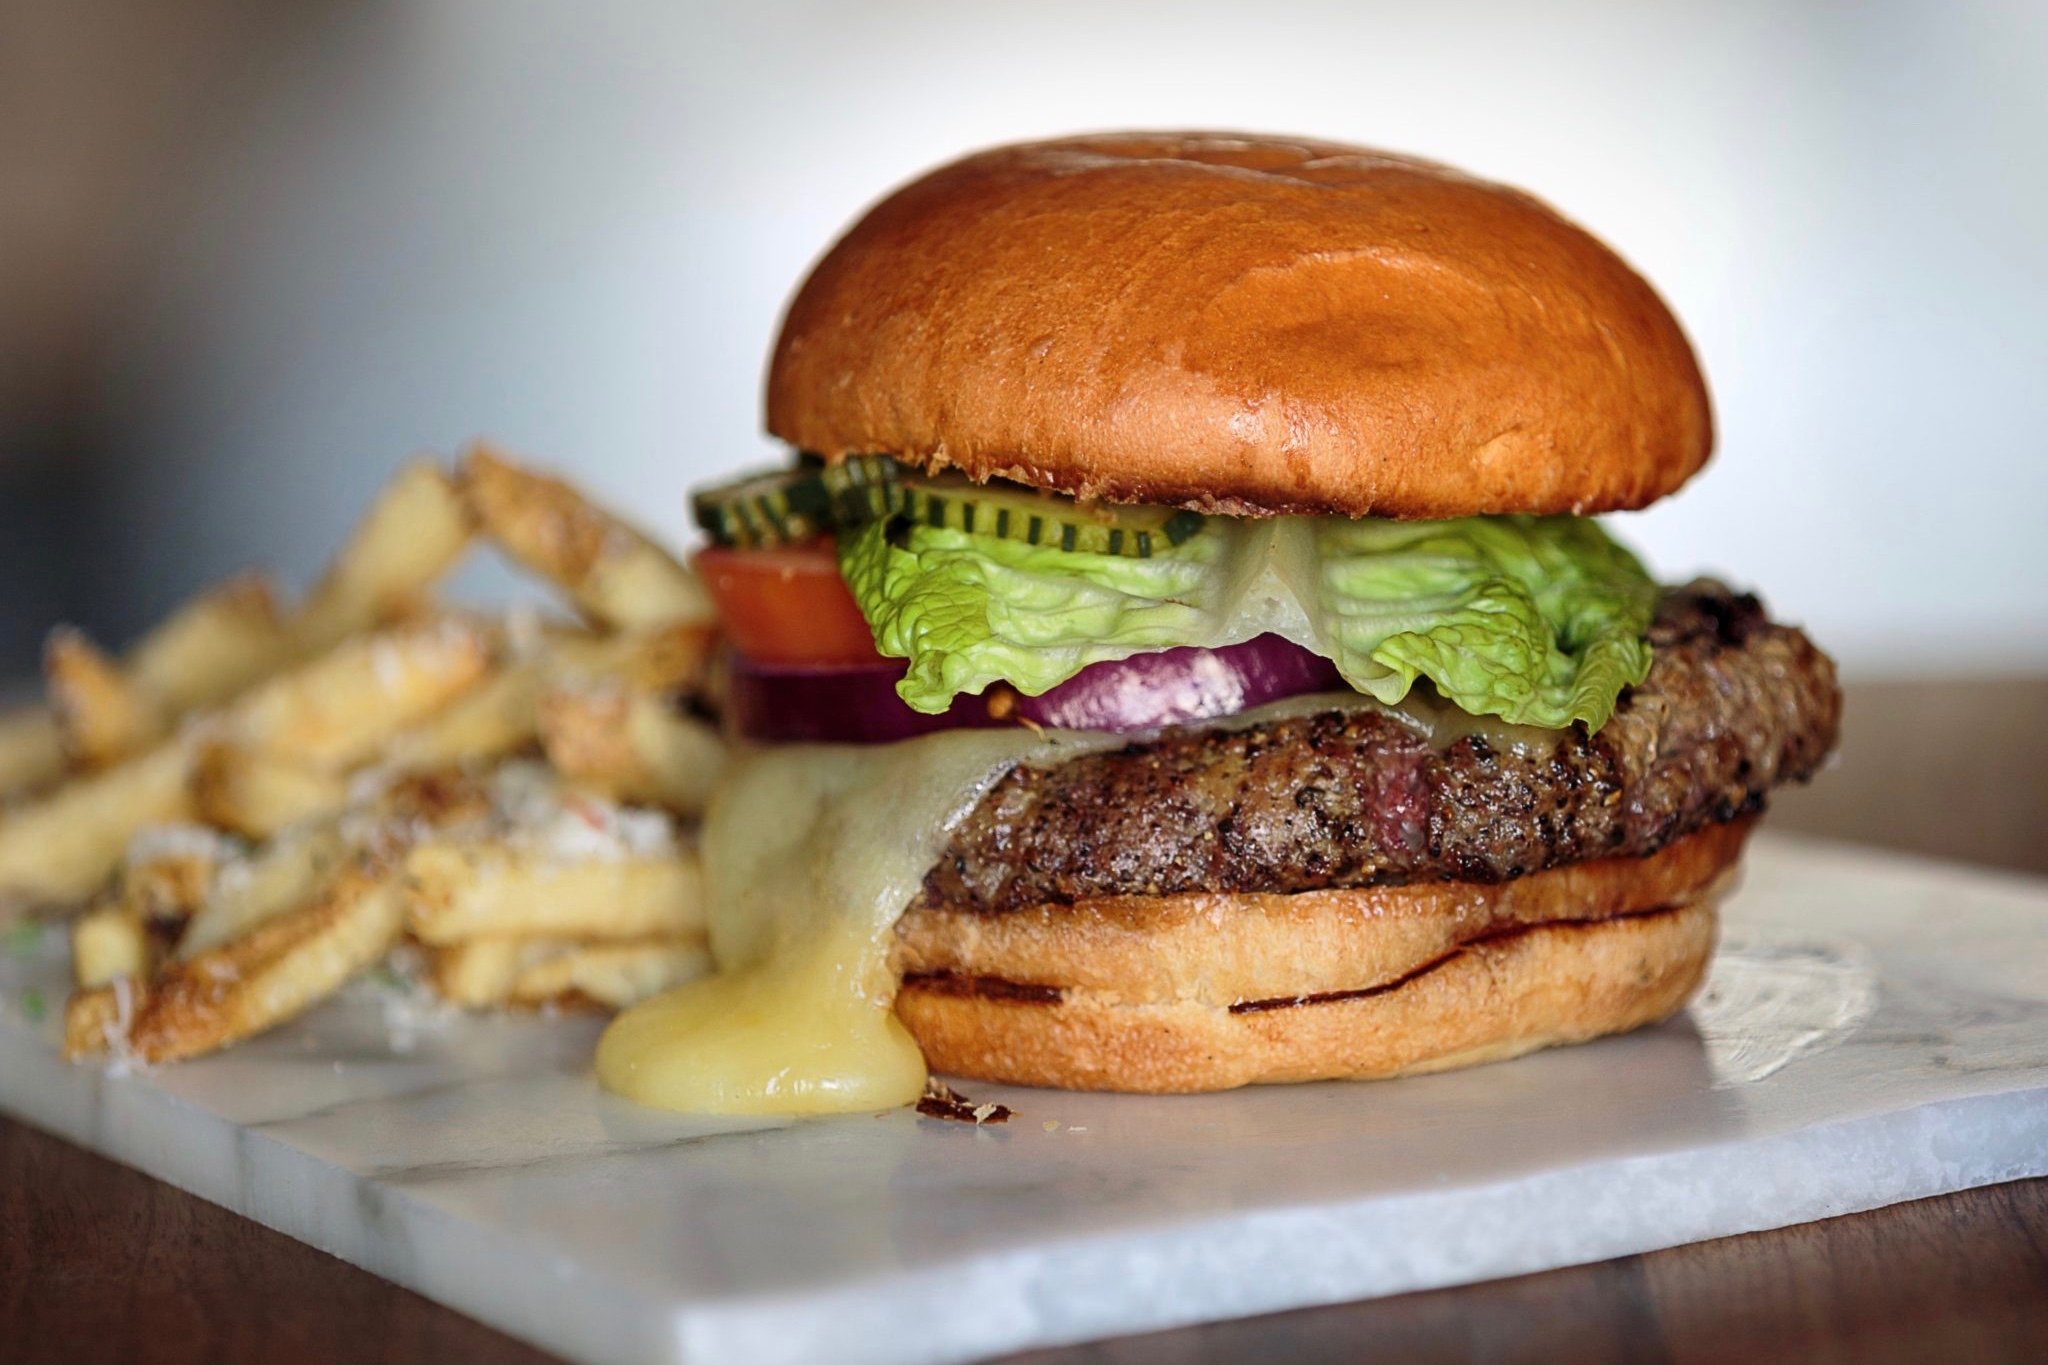 The Ultimate Burger from Catelli's in Geyserville. (Chris Hardy/For Sonoma Magazine)